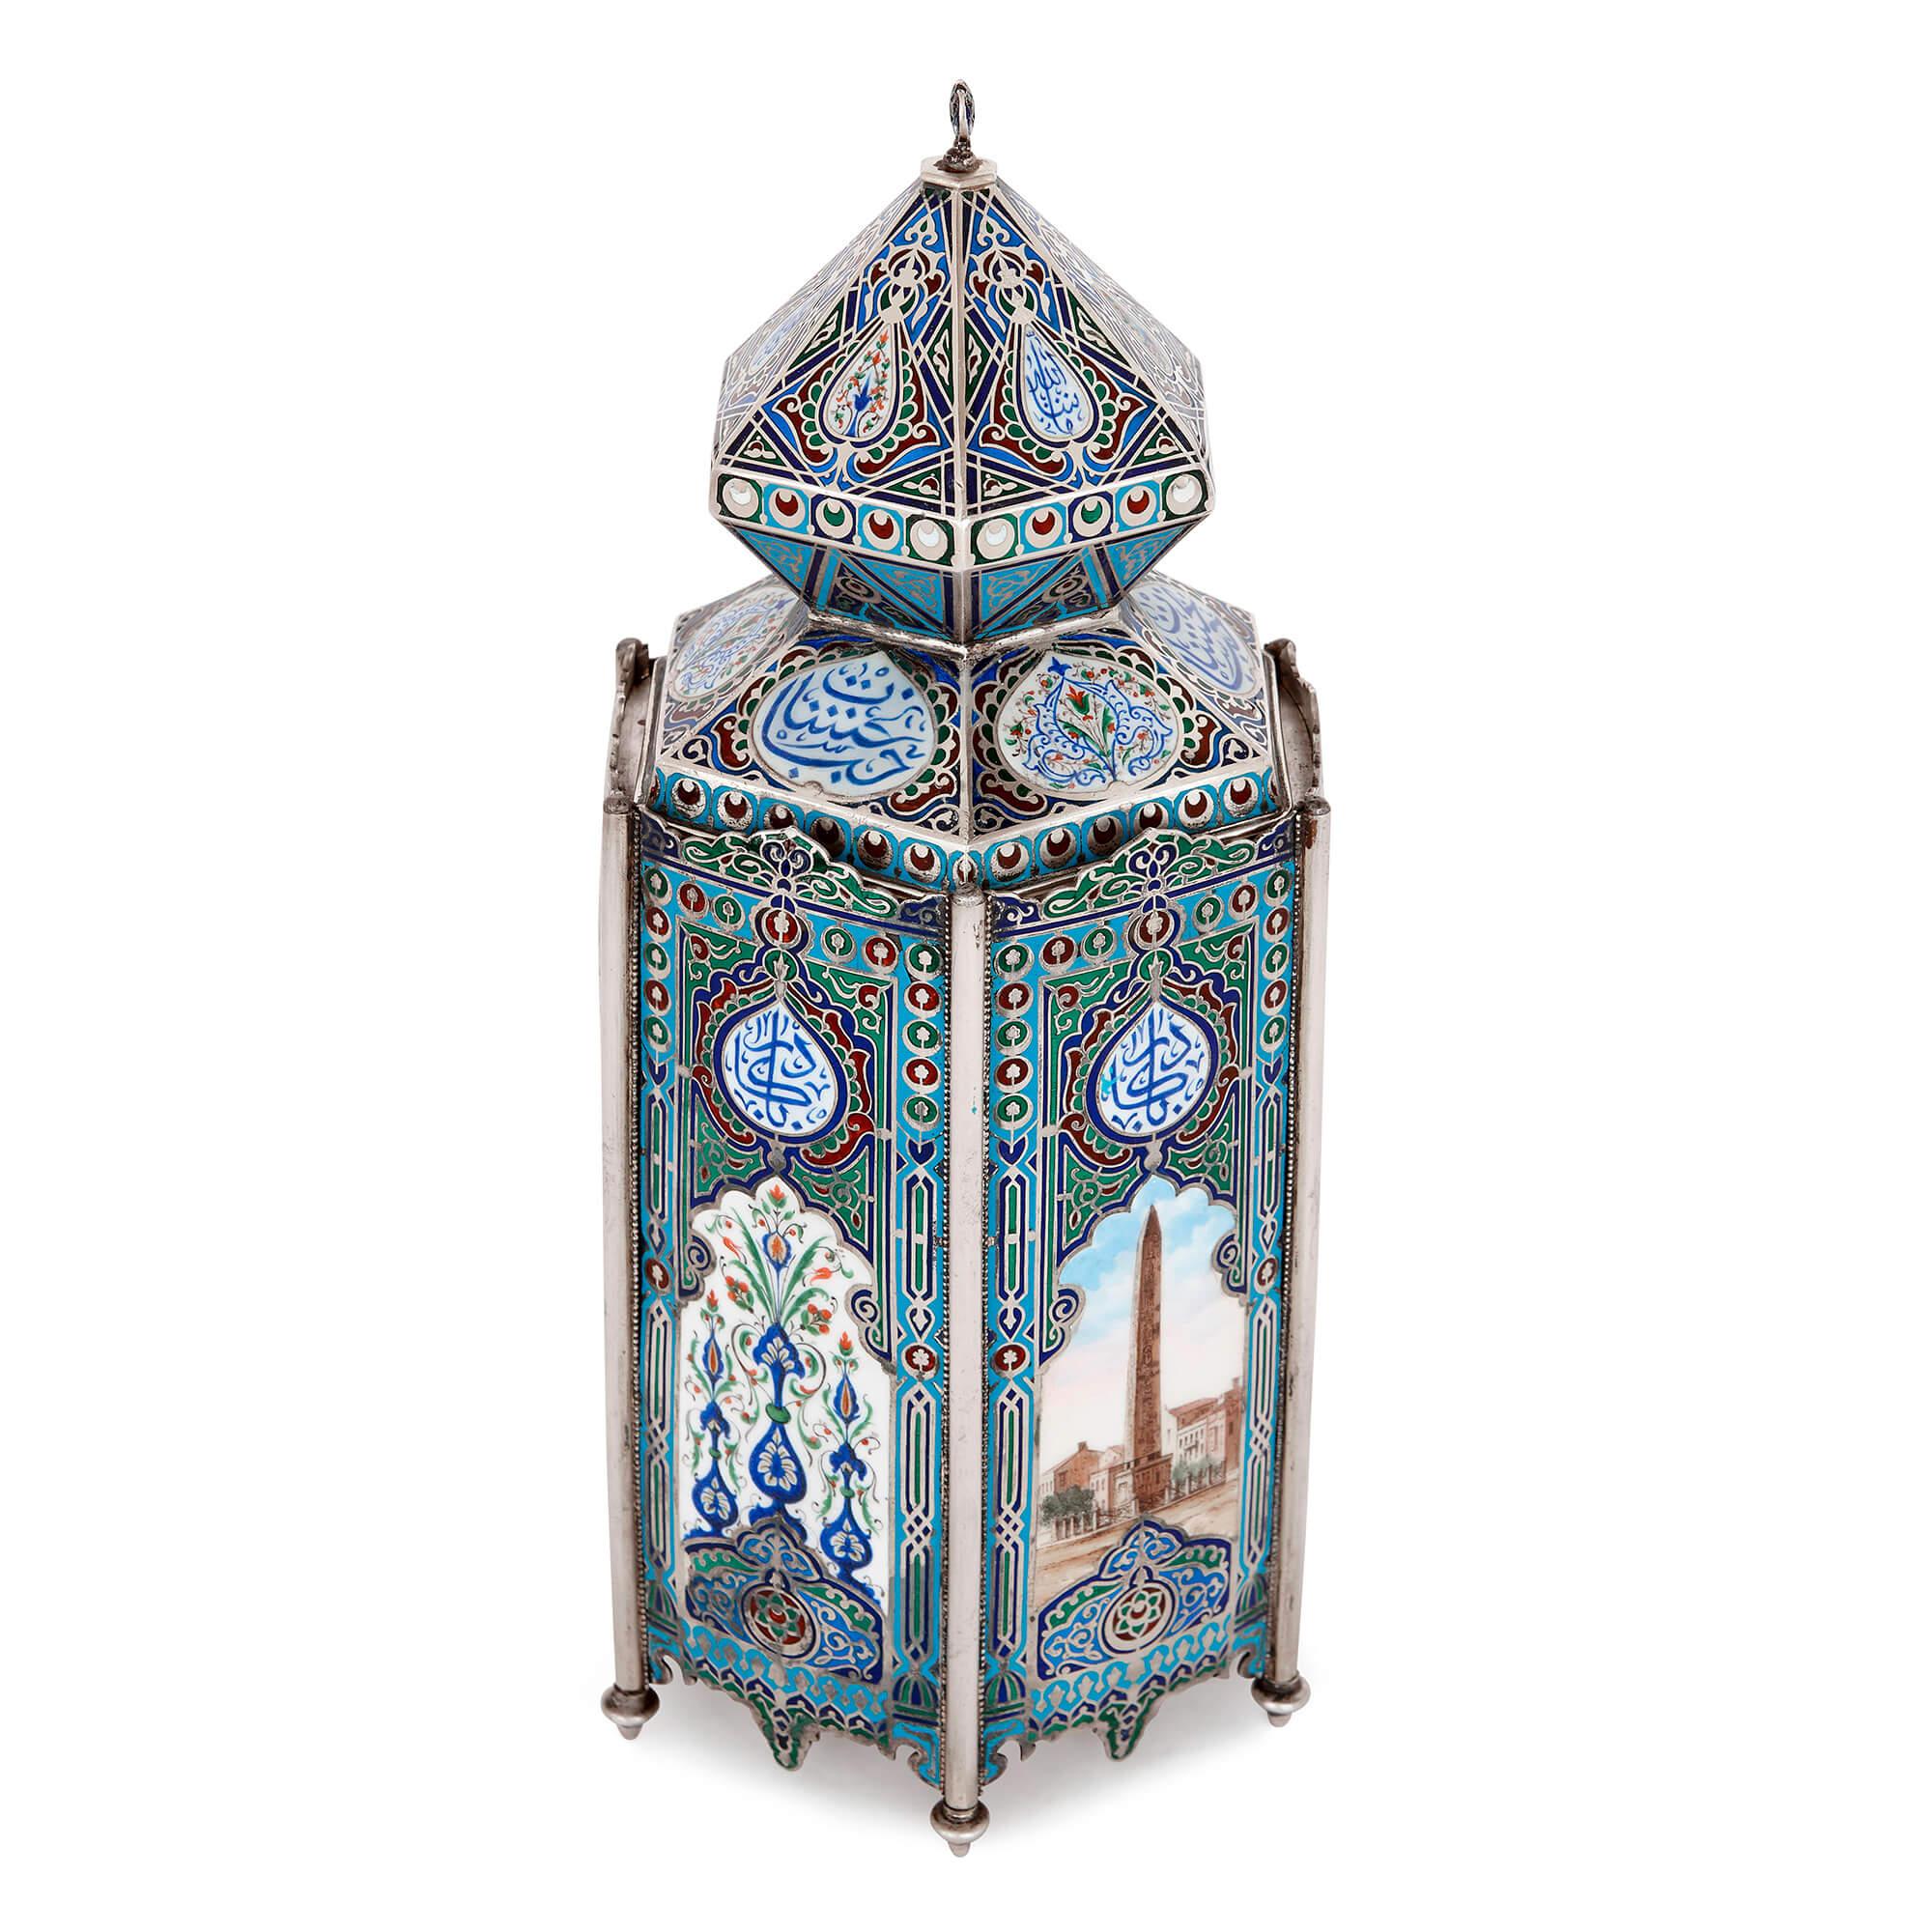 This Russian-made Islamic vase is an exquisite piece of craftsmanship that was intended for the Turkish market. The piece is colourfully enamelled and painted. The vase is hexagonal in form, with a removable diamond-shaped lid, topped with a